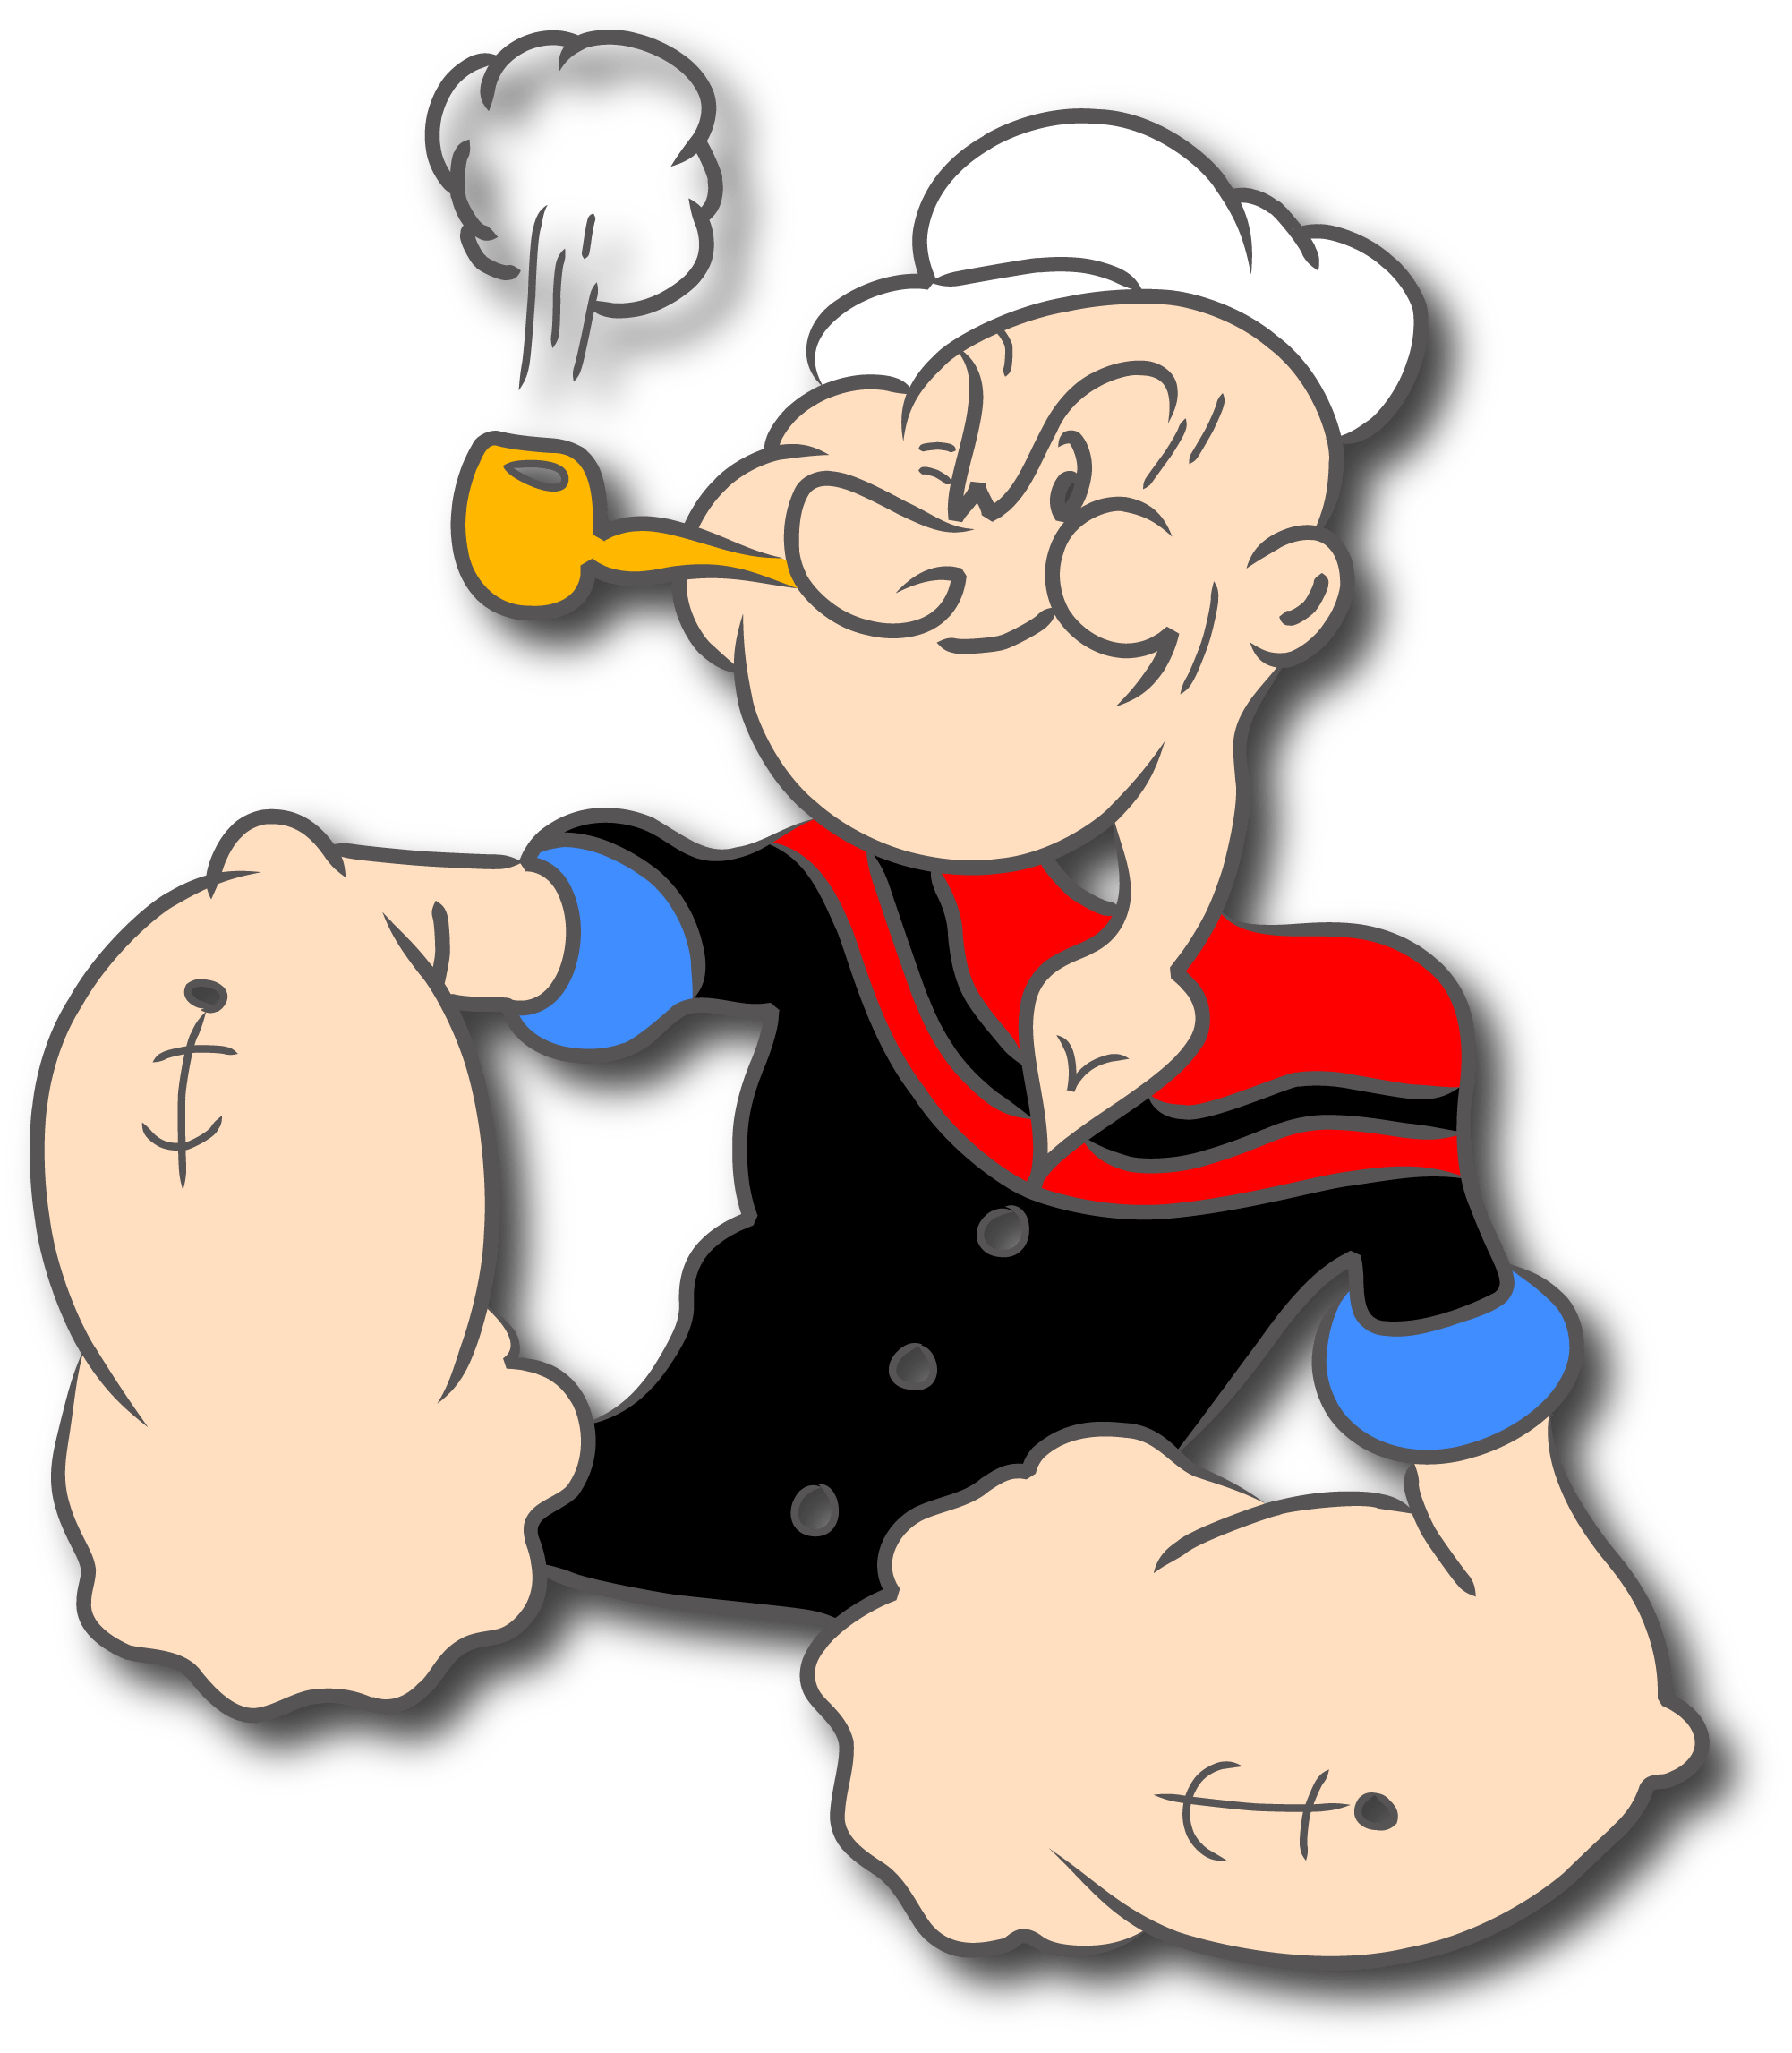 Popeye Cartoon Wallpaper for Android